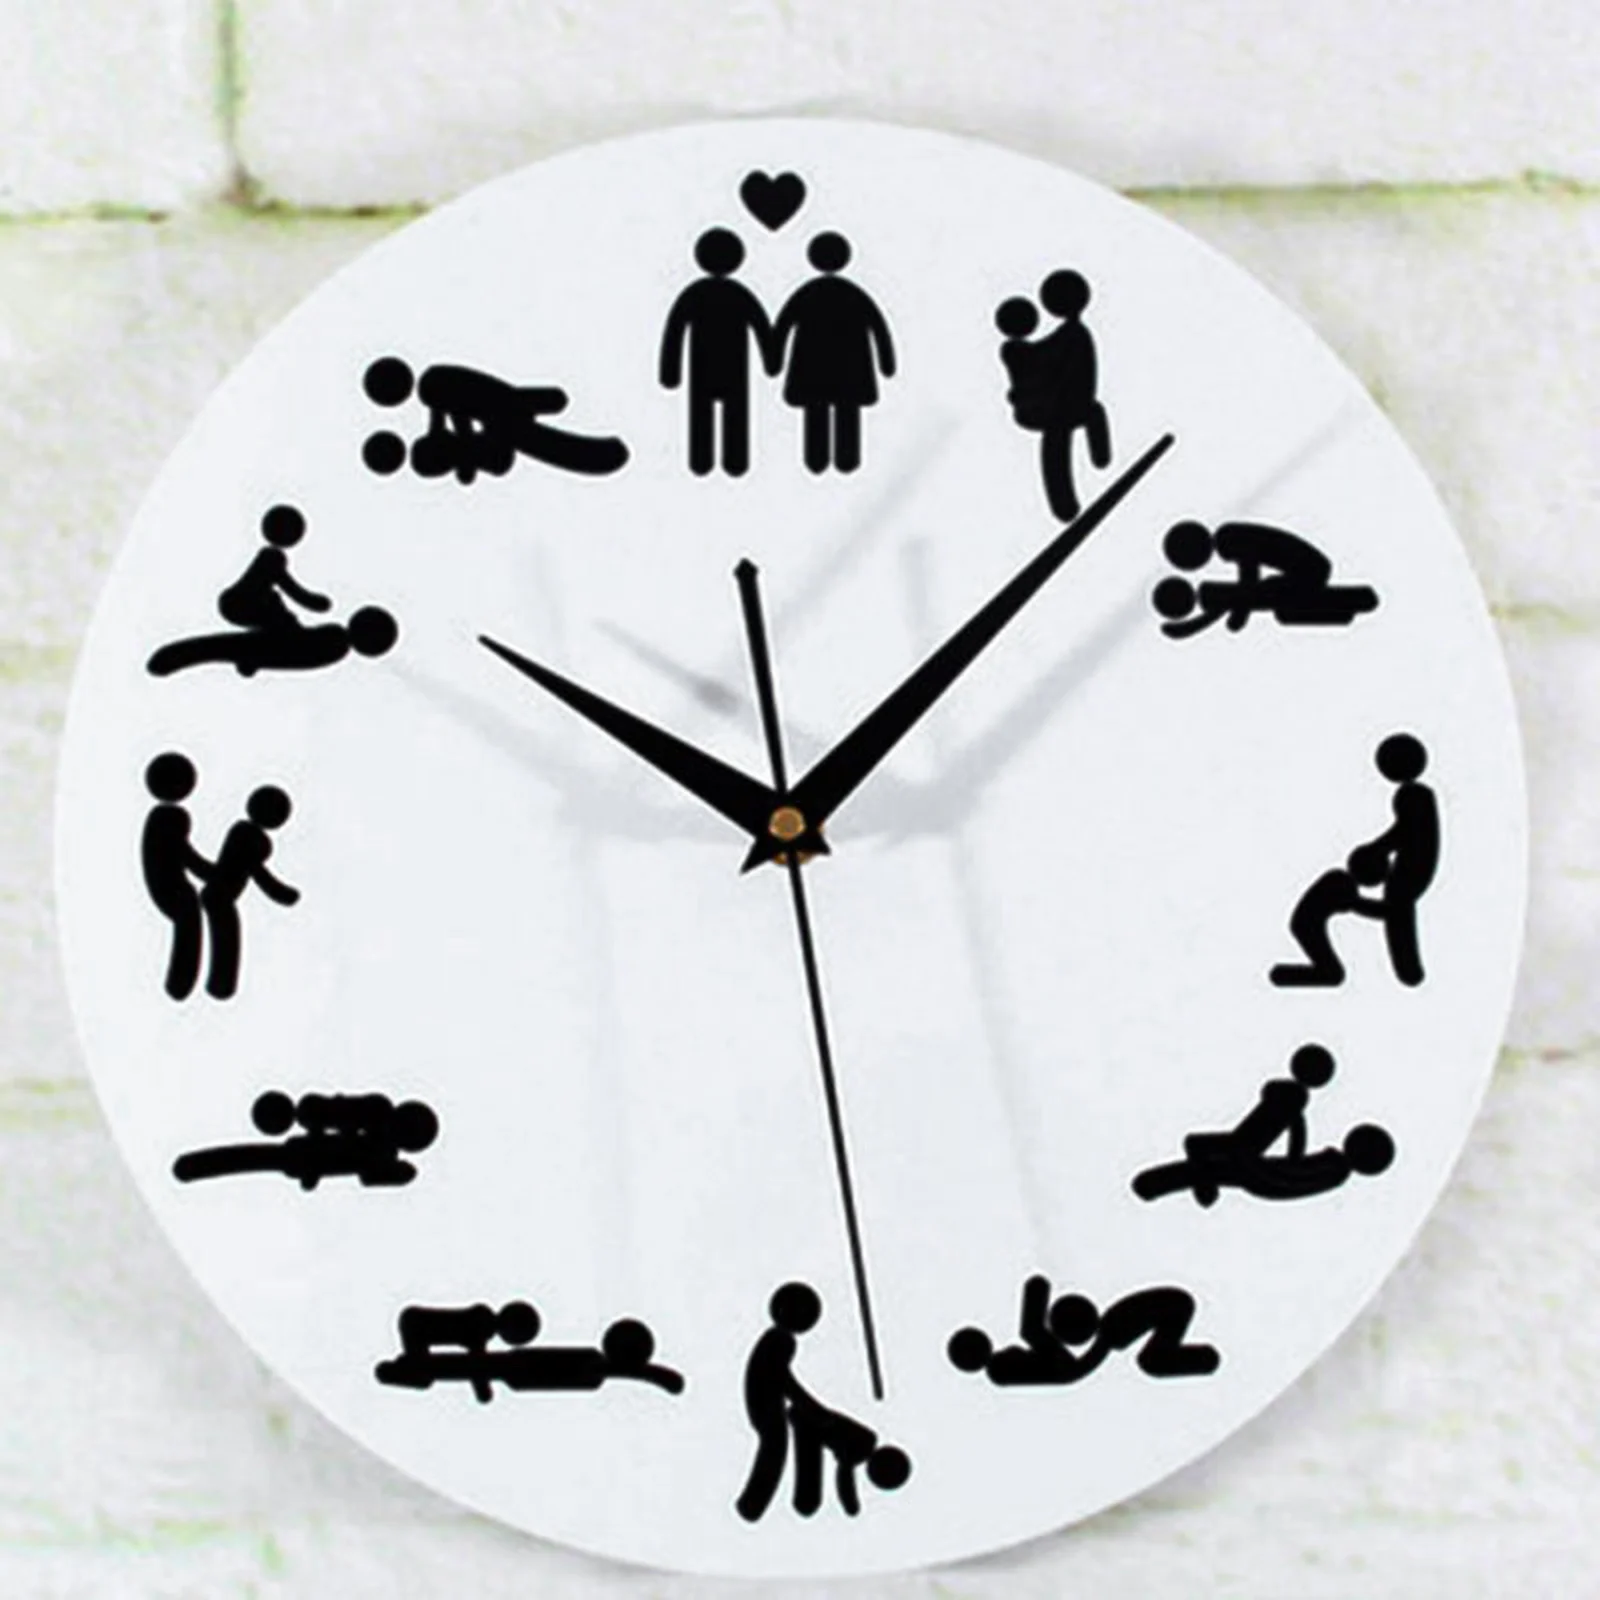 24 Hours Sexual Positions Quartz Wall Clock Adult Sex Game Wall Watch Sex Watch Wall Hanging Clock Friends Gift